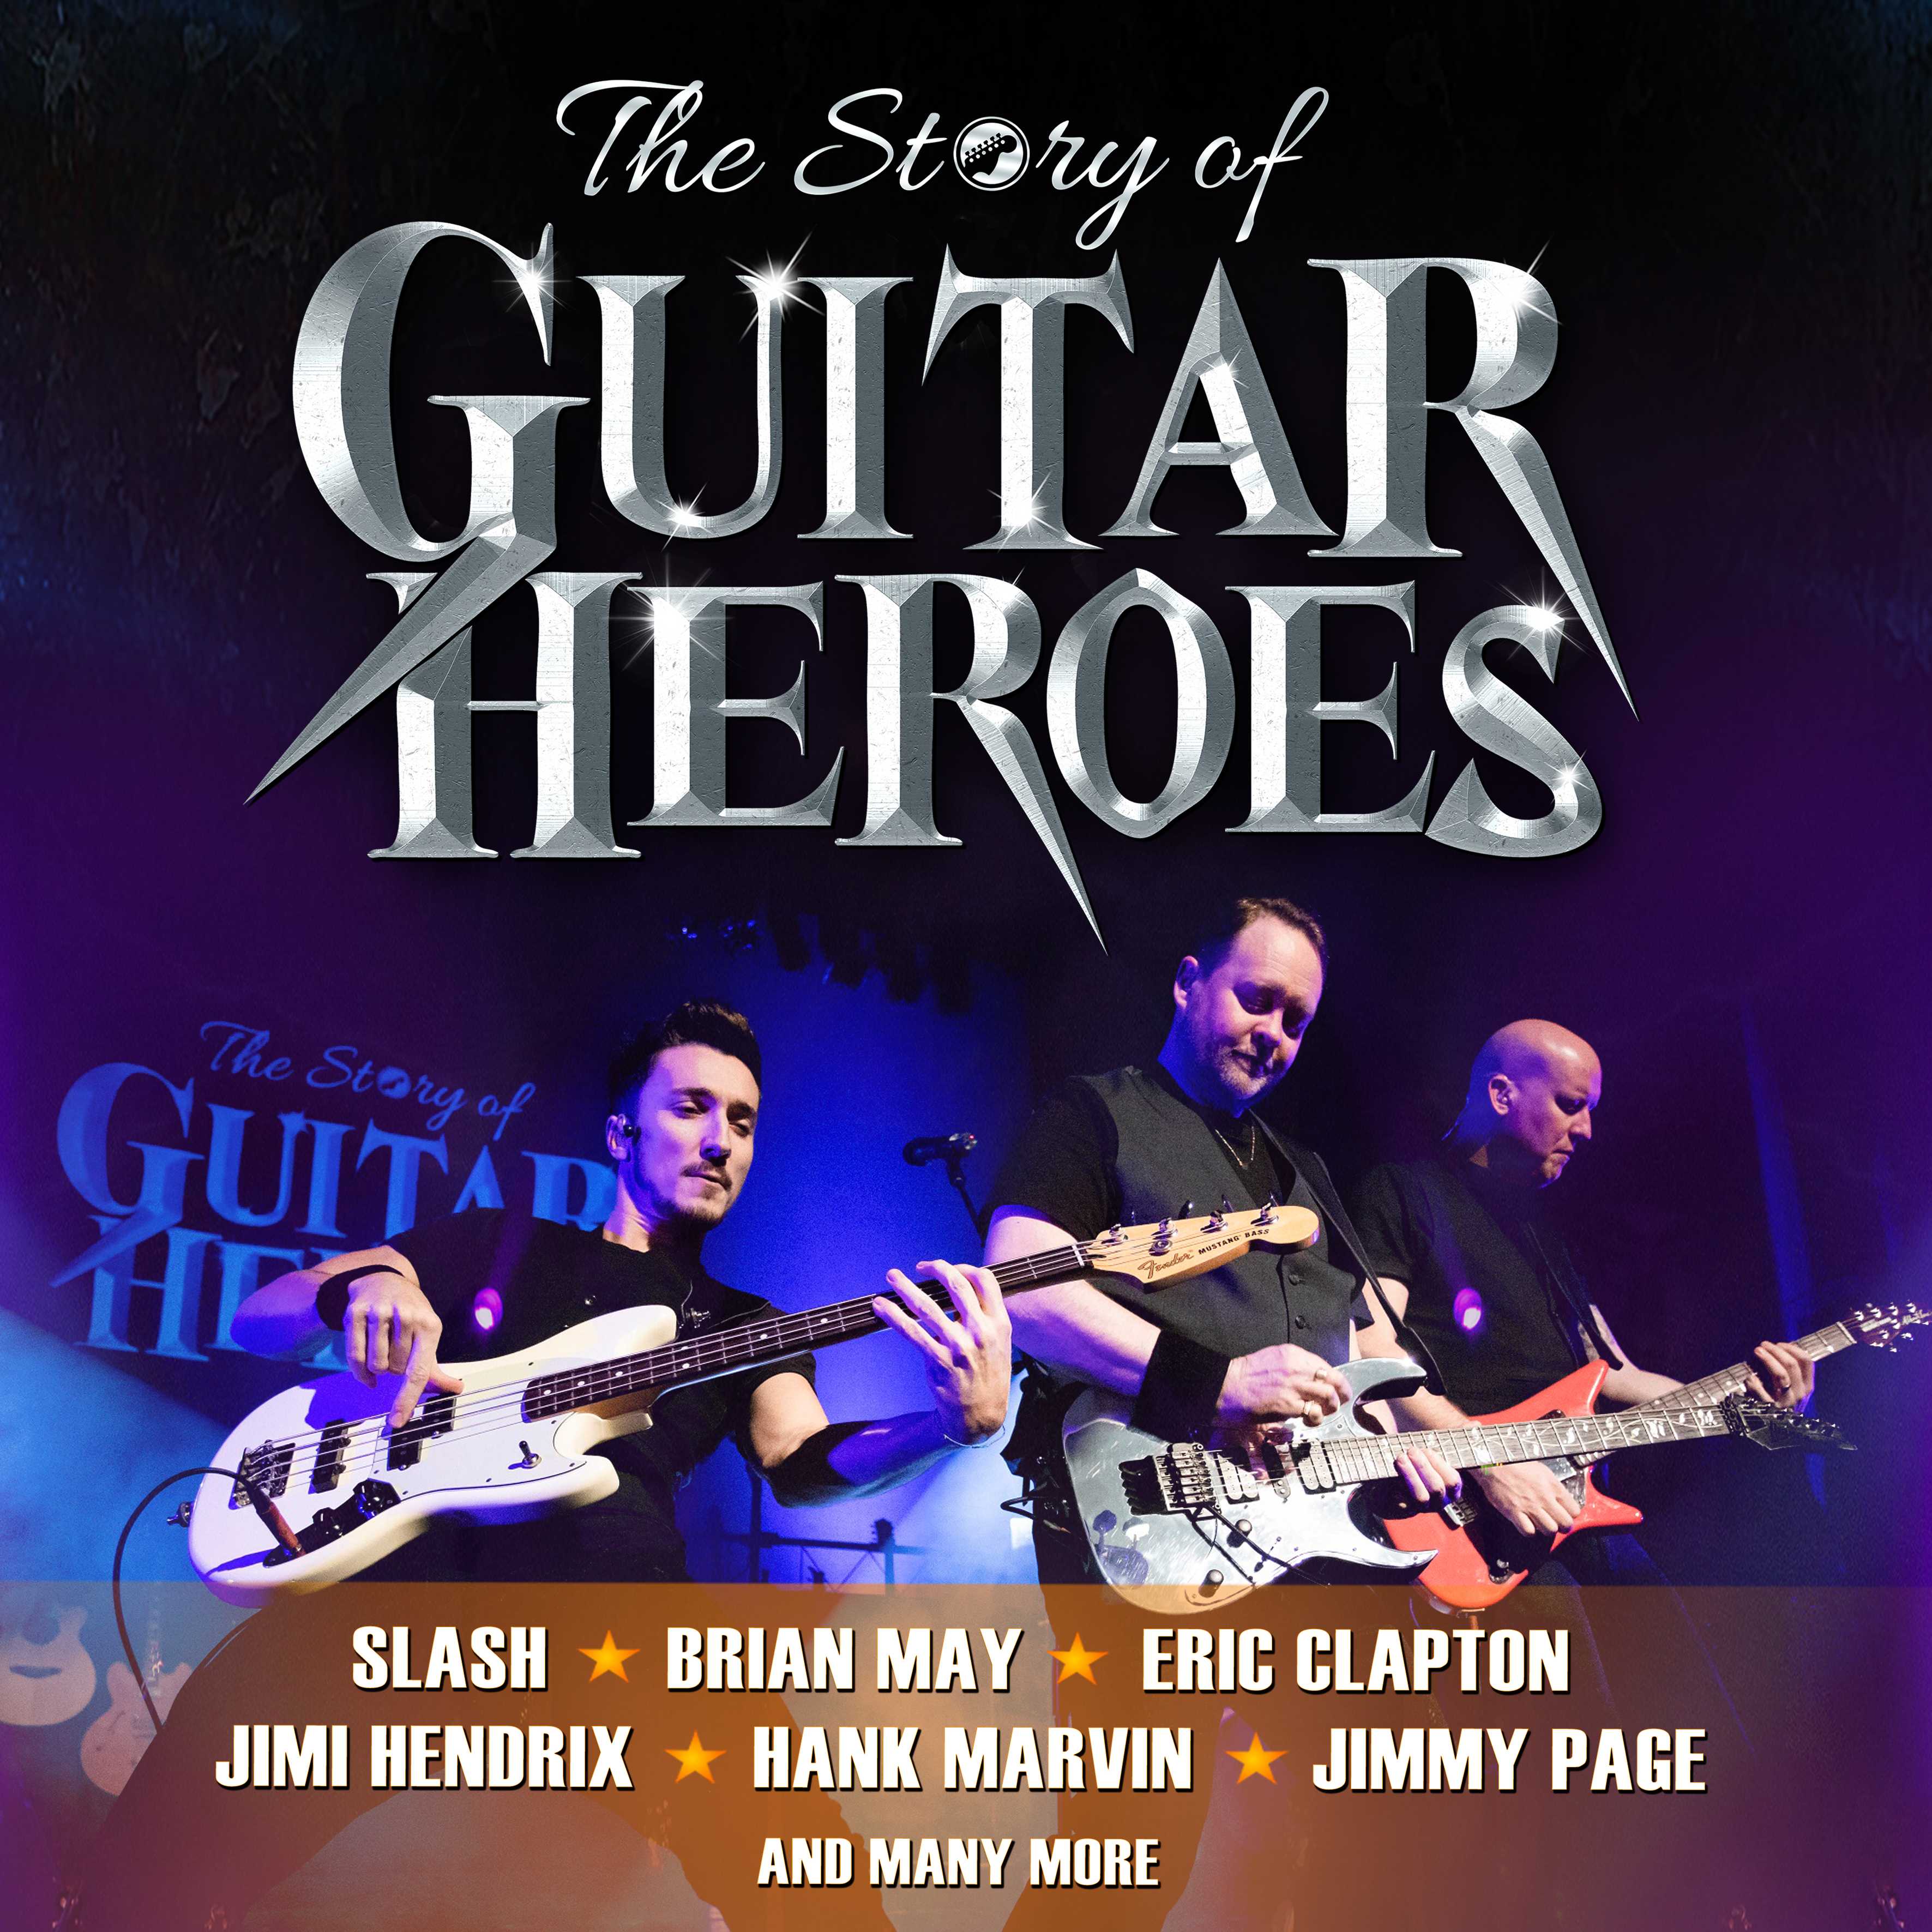 The Story of Guitar Heroes Events Discover Lowestoft